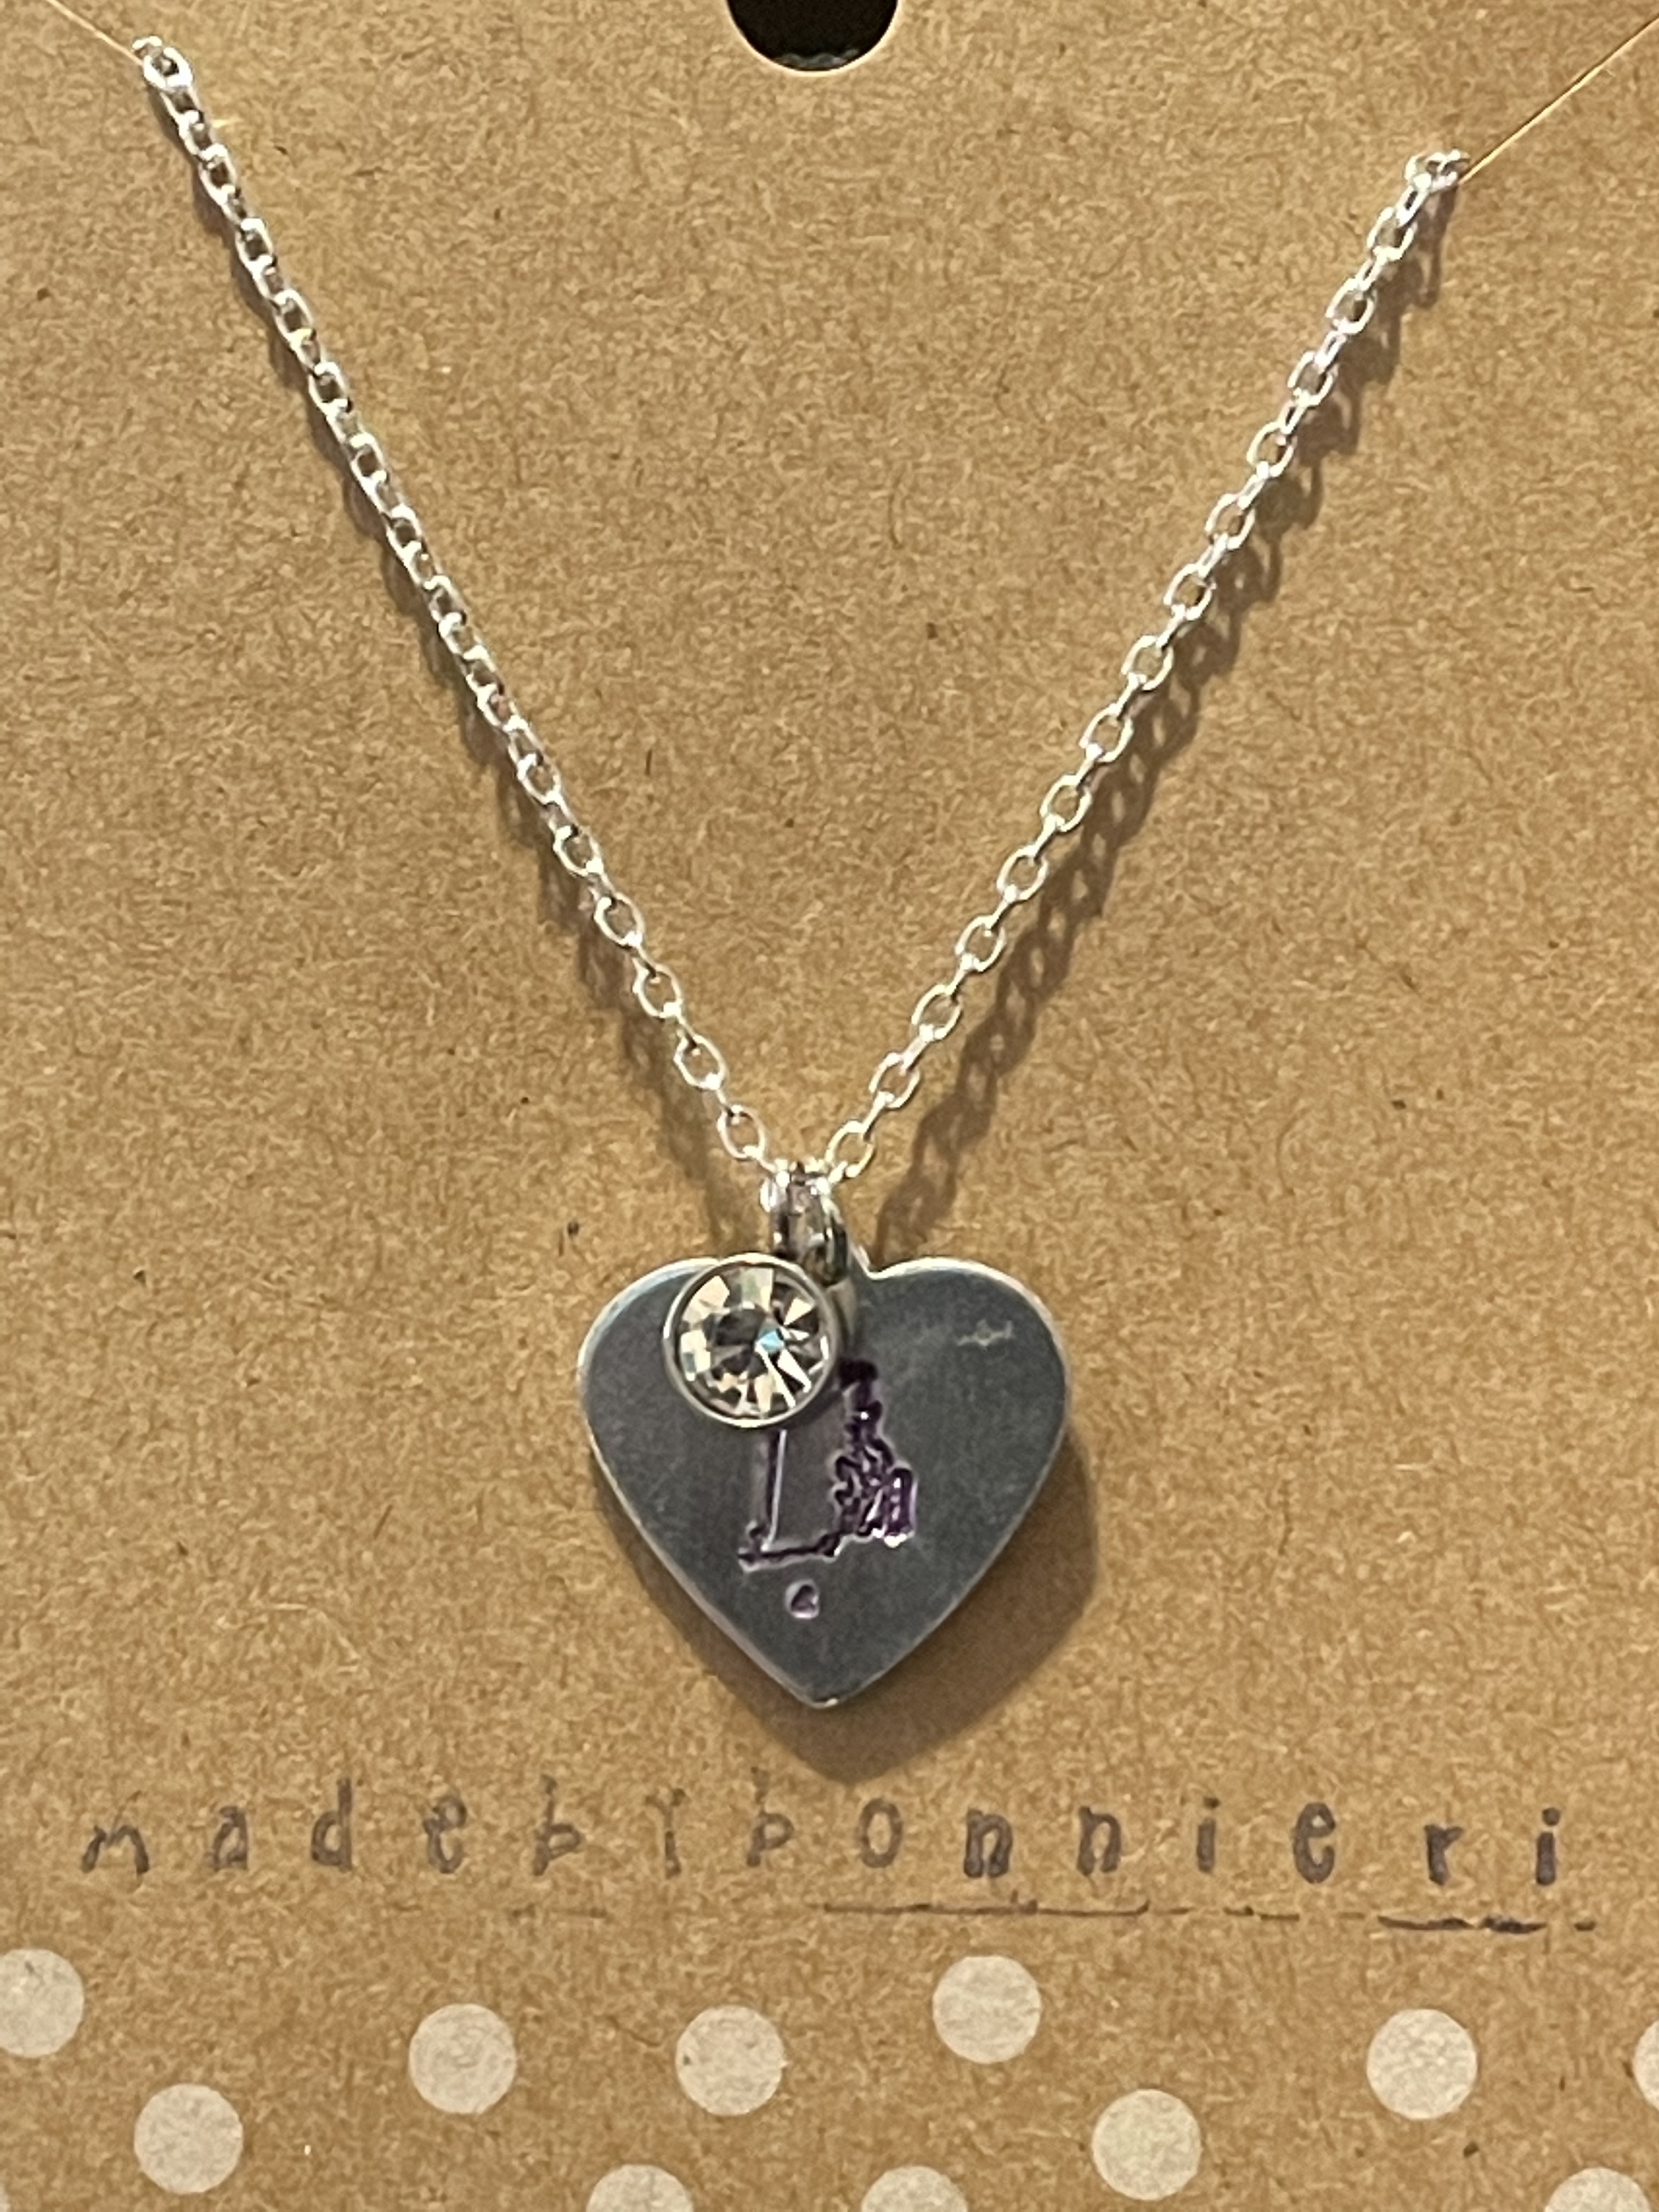 Rhode Island stamped necklace made in RI jewelry by an artist